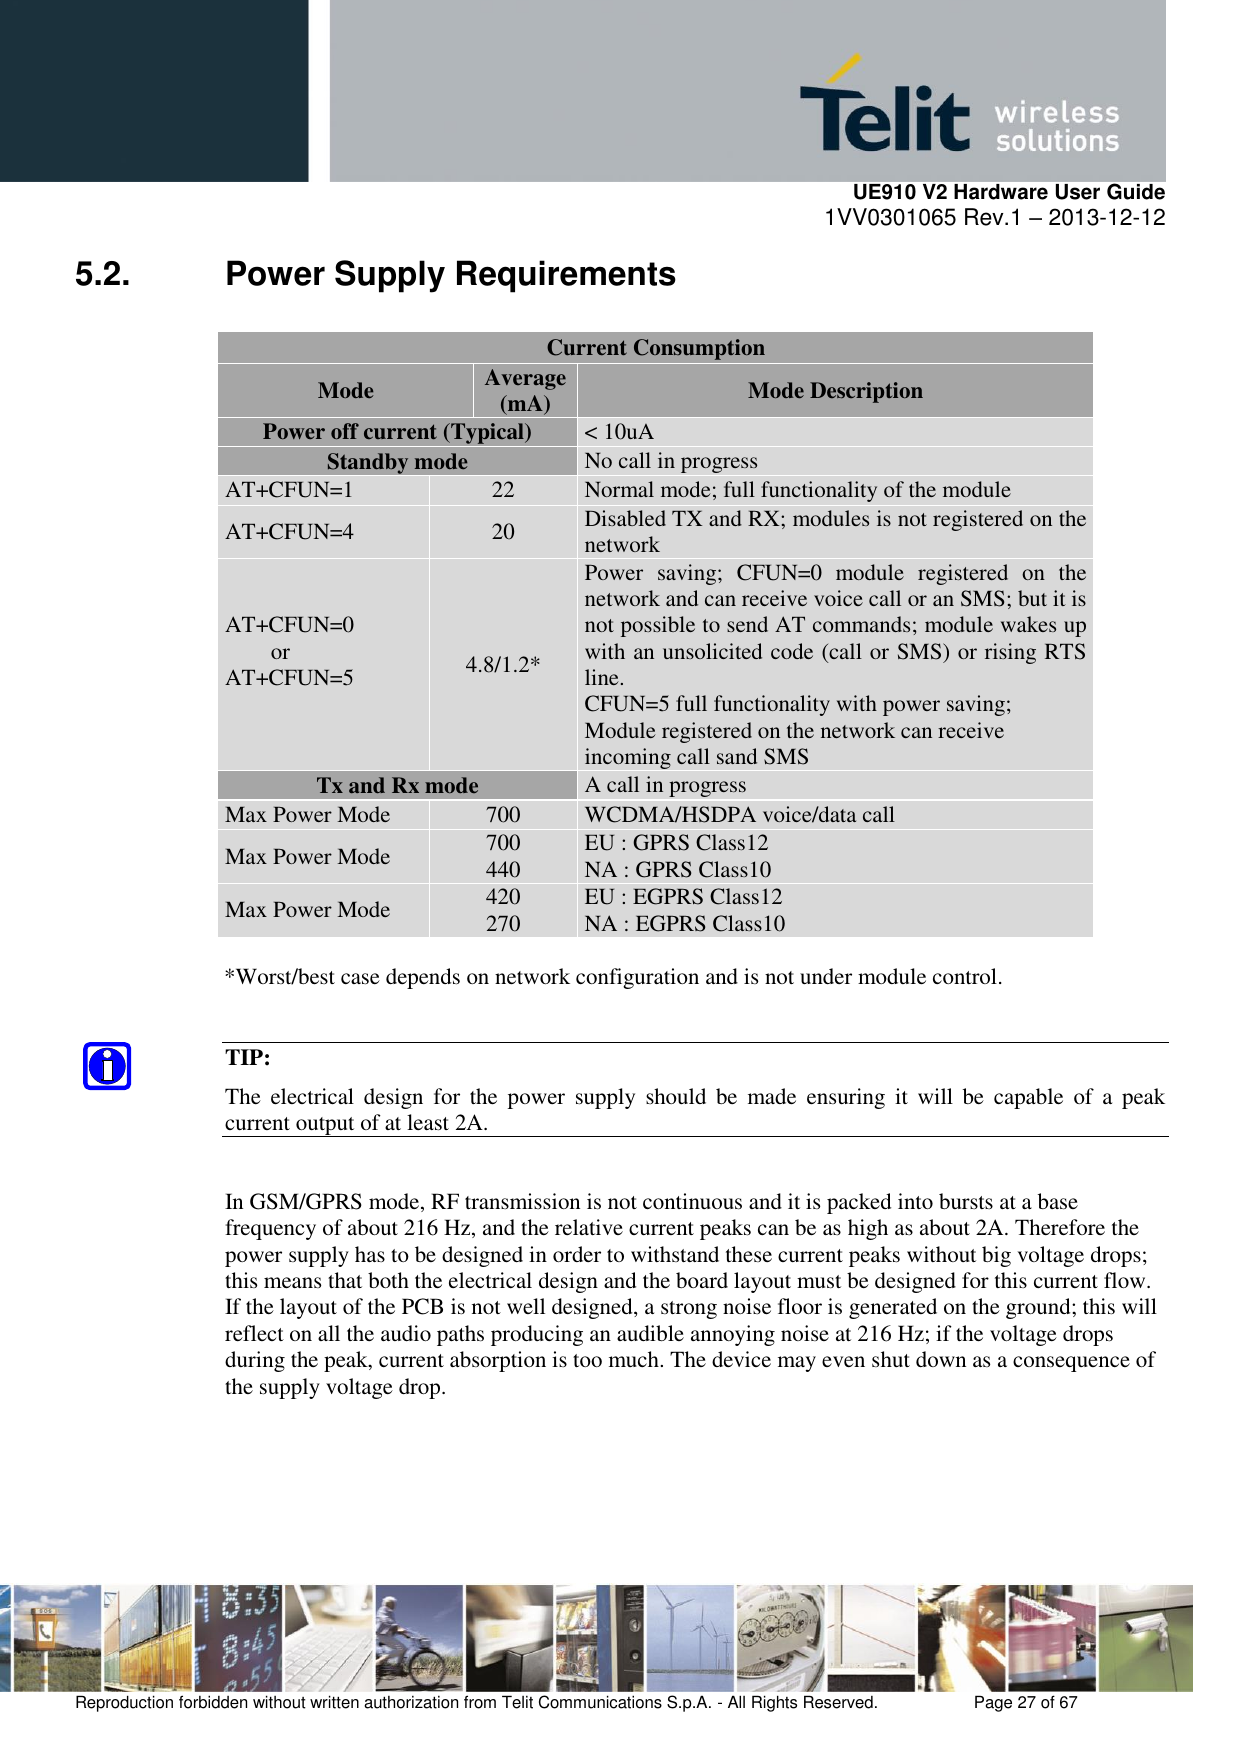     UE910 V2 Hardware User Guide 1VV0301065 Rev.1 – 2013-12-12  Reproduction forbidden without written authorization from Telit Communications S.p.A. - All Rights Reserved.    Page 27 of 67                                                     5.2.  Power Supply Requirements Current Consumption Mode Average (mA) Mode Description Power off current (Typical) &lt; 10uA Standby mode No call in progress AT+CFUN=1 22 Normal mode; full functionality of the module AT+CFUN=4 20 Disabled TX and RX; modules is not registered on the network AT+CFUN=0 or AT+CFUN=5  4.8/1.2* Power  saving;  CFUN=0  module  registered  on  the network and can receive voice call or an SMS; but it is not possible to send AT commands; module wakes up with an unsolicited code (call or SMS) or rising RTS line. CFUN=5 full functionality with power saving; Module registered on the network can receive  incoming call sand SMS Tx and Rx mode A call in progress Max Power Mode 700 WCDMA/HSDPA voice/data call Max Power Mode 700 440 EU : GPRS Class12 NA : GPRS Class10 Max Power Mode 420 270 EU : EGPRS Class12 NA : EGPRS Class10  *Worst/best case depends on network configuration and is not under module control.  TIP: The  electrical  design  for  the  power  supply  should  be  made  ensuring  it  will  be  capable  of  a  peak current output of at least 2A.  In GSM/GPRS mode, RF transmission is not continuous and it is packed into bursts at a base frequency of about 216 Hz, and the relative current peaks can be as high as about 2A. Therefore the power supply has to be designed in order to withstand these current peaks without big voltage drops; this means that both the electrical design and the board layout must be designed for this current flow. If the layout of the PCB is not well designed, a strong noise floor is generated on the ground; this will reflect on all the audio paths producing an audible annoying noise at 216 Hz; if the voltage drops during the peak, current absorption is too much. The device may even shut down as a consequence of the supply voltage drop.  